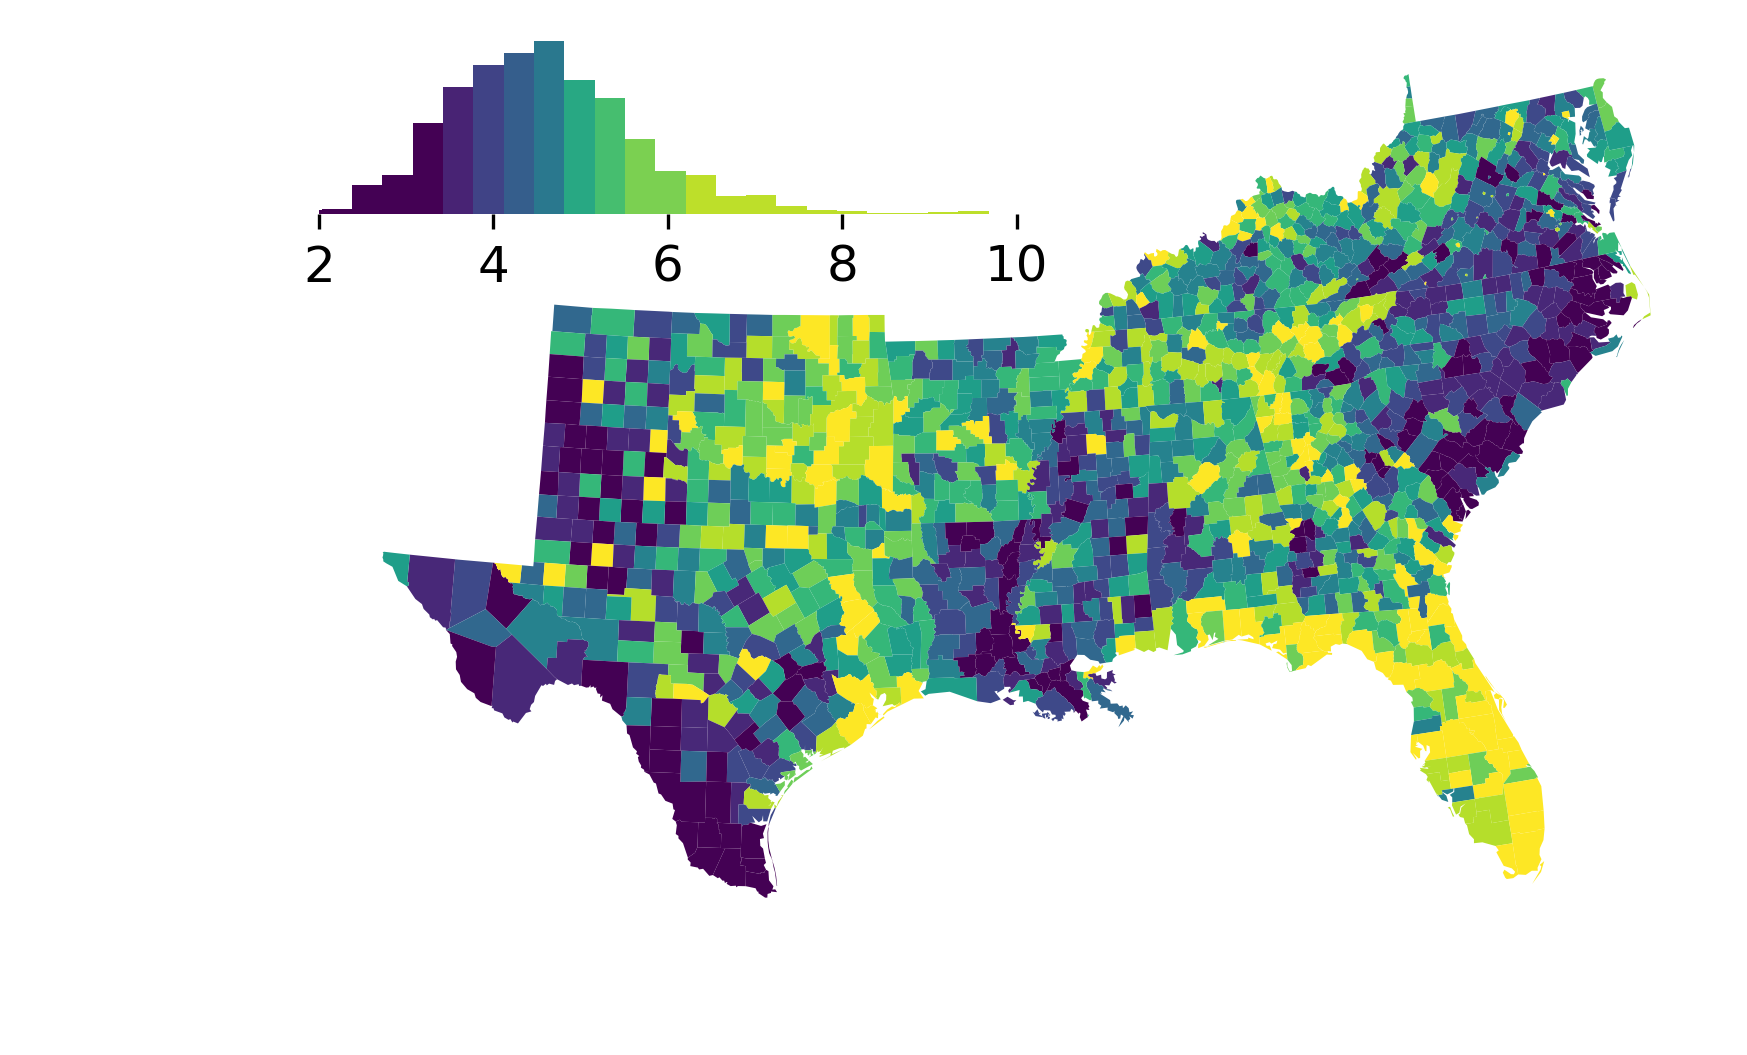 Example legendgram map in the US south